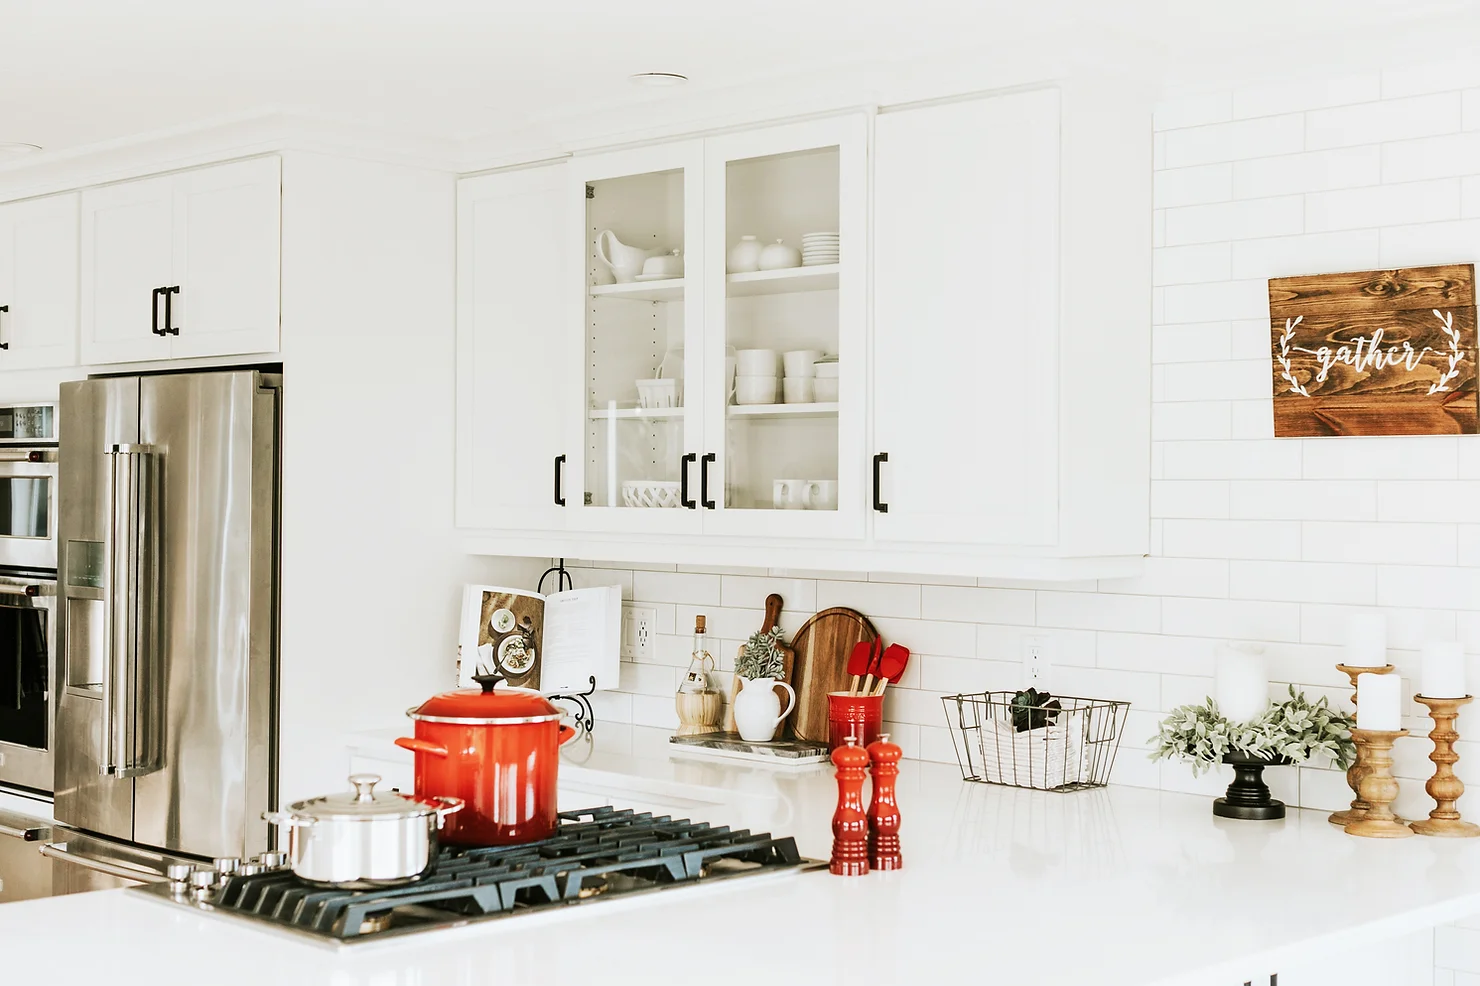 Modern kitchen interior with white cabinetry, stainless steel appliances, a gas stove, red pots, and decorative elements. A wooden sign reads "gather."